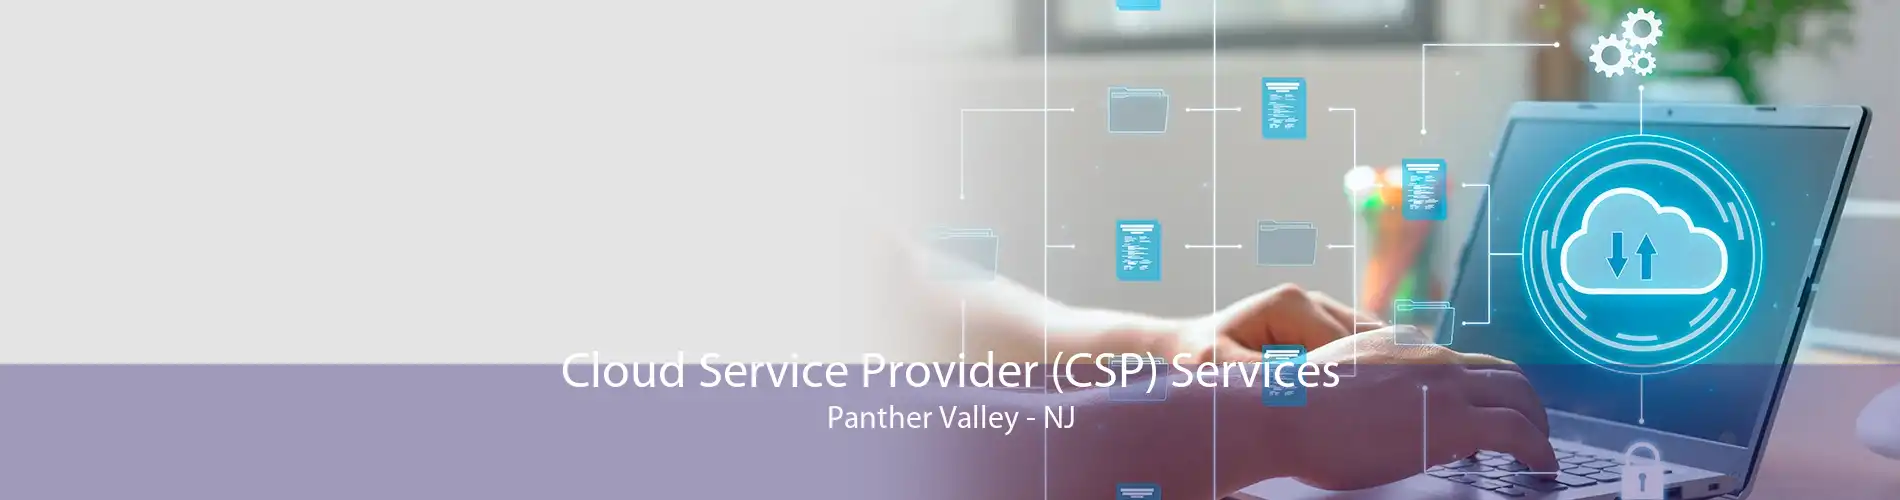 Cloud Service Provider (CSP) Services Panther Valley - NJ